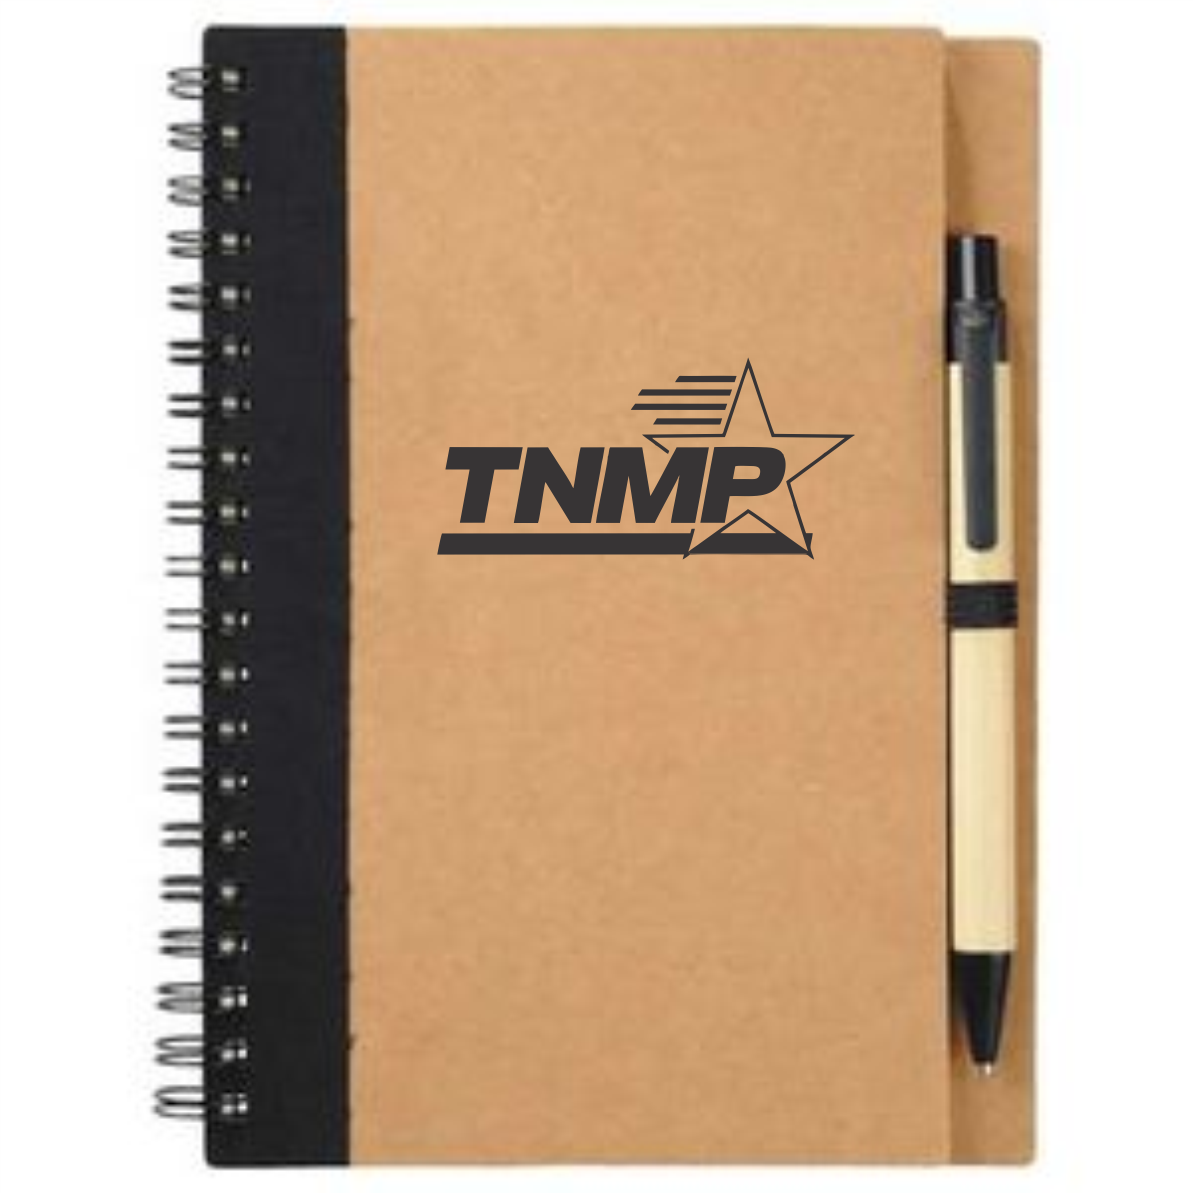 5" X 7" Eco Spiral Notebook With Pen